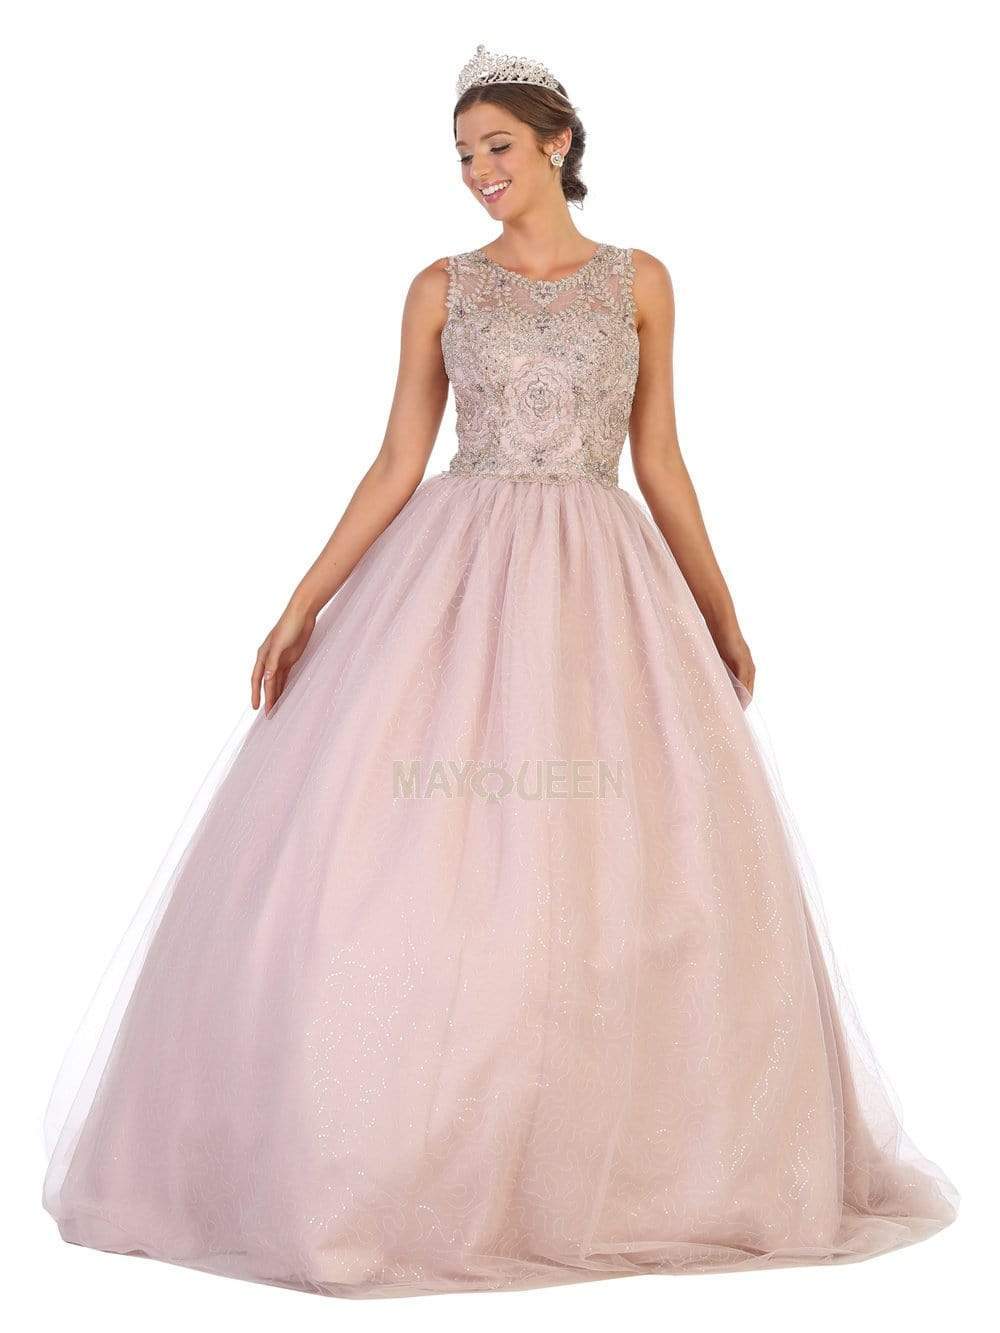 May Queen - LK137 Sleeveless Appliqued Sheer Cutout Back Gown Prom Dresses 4 / Mauve